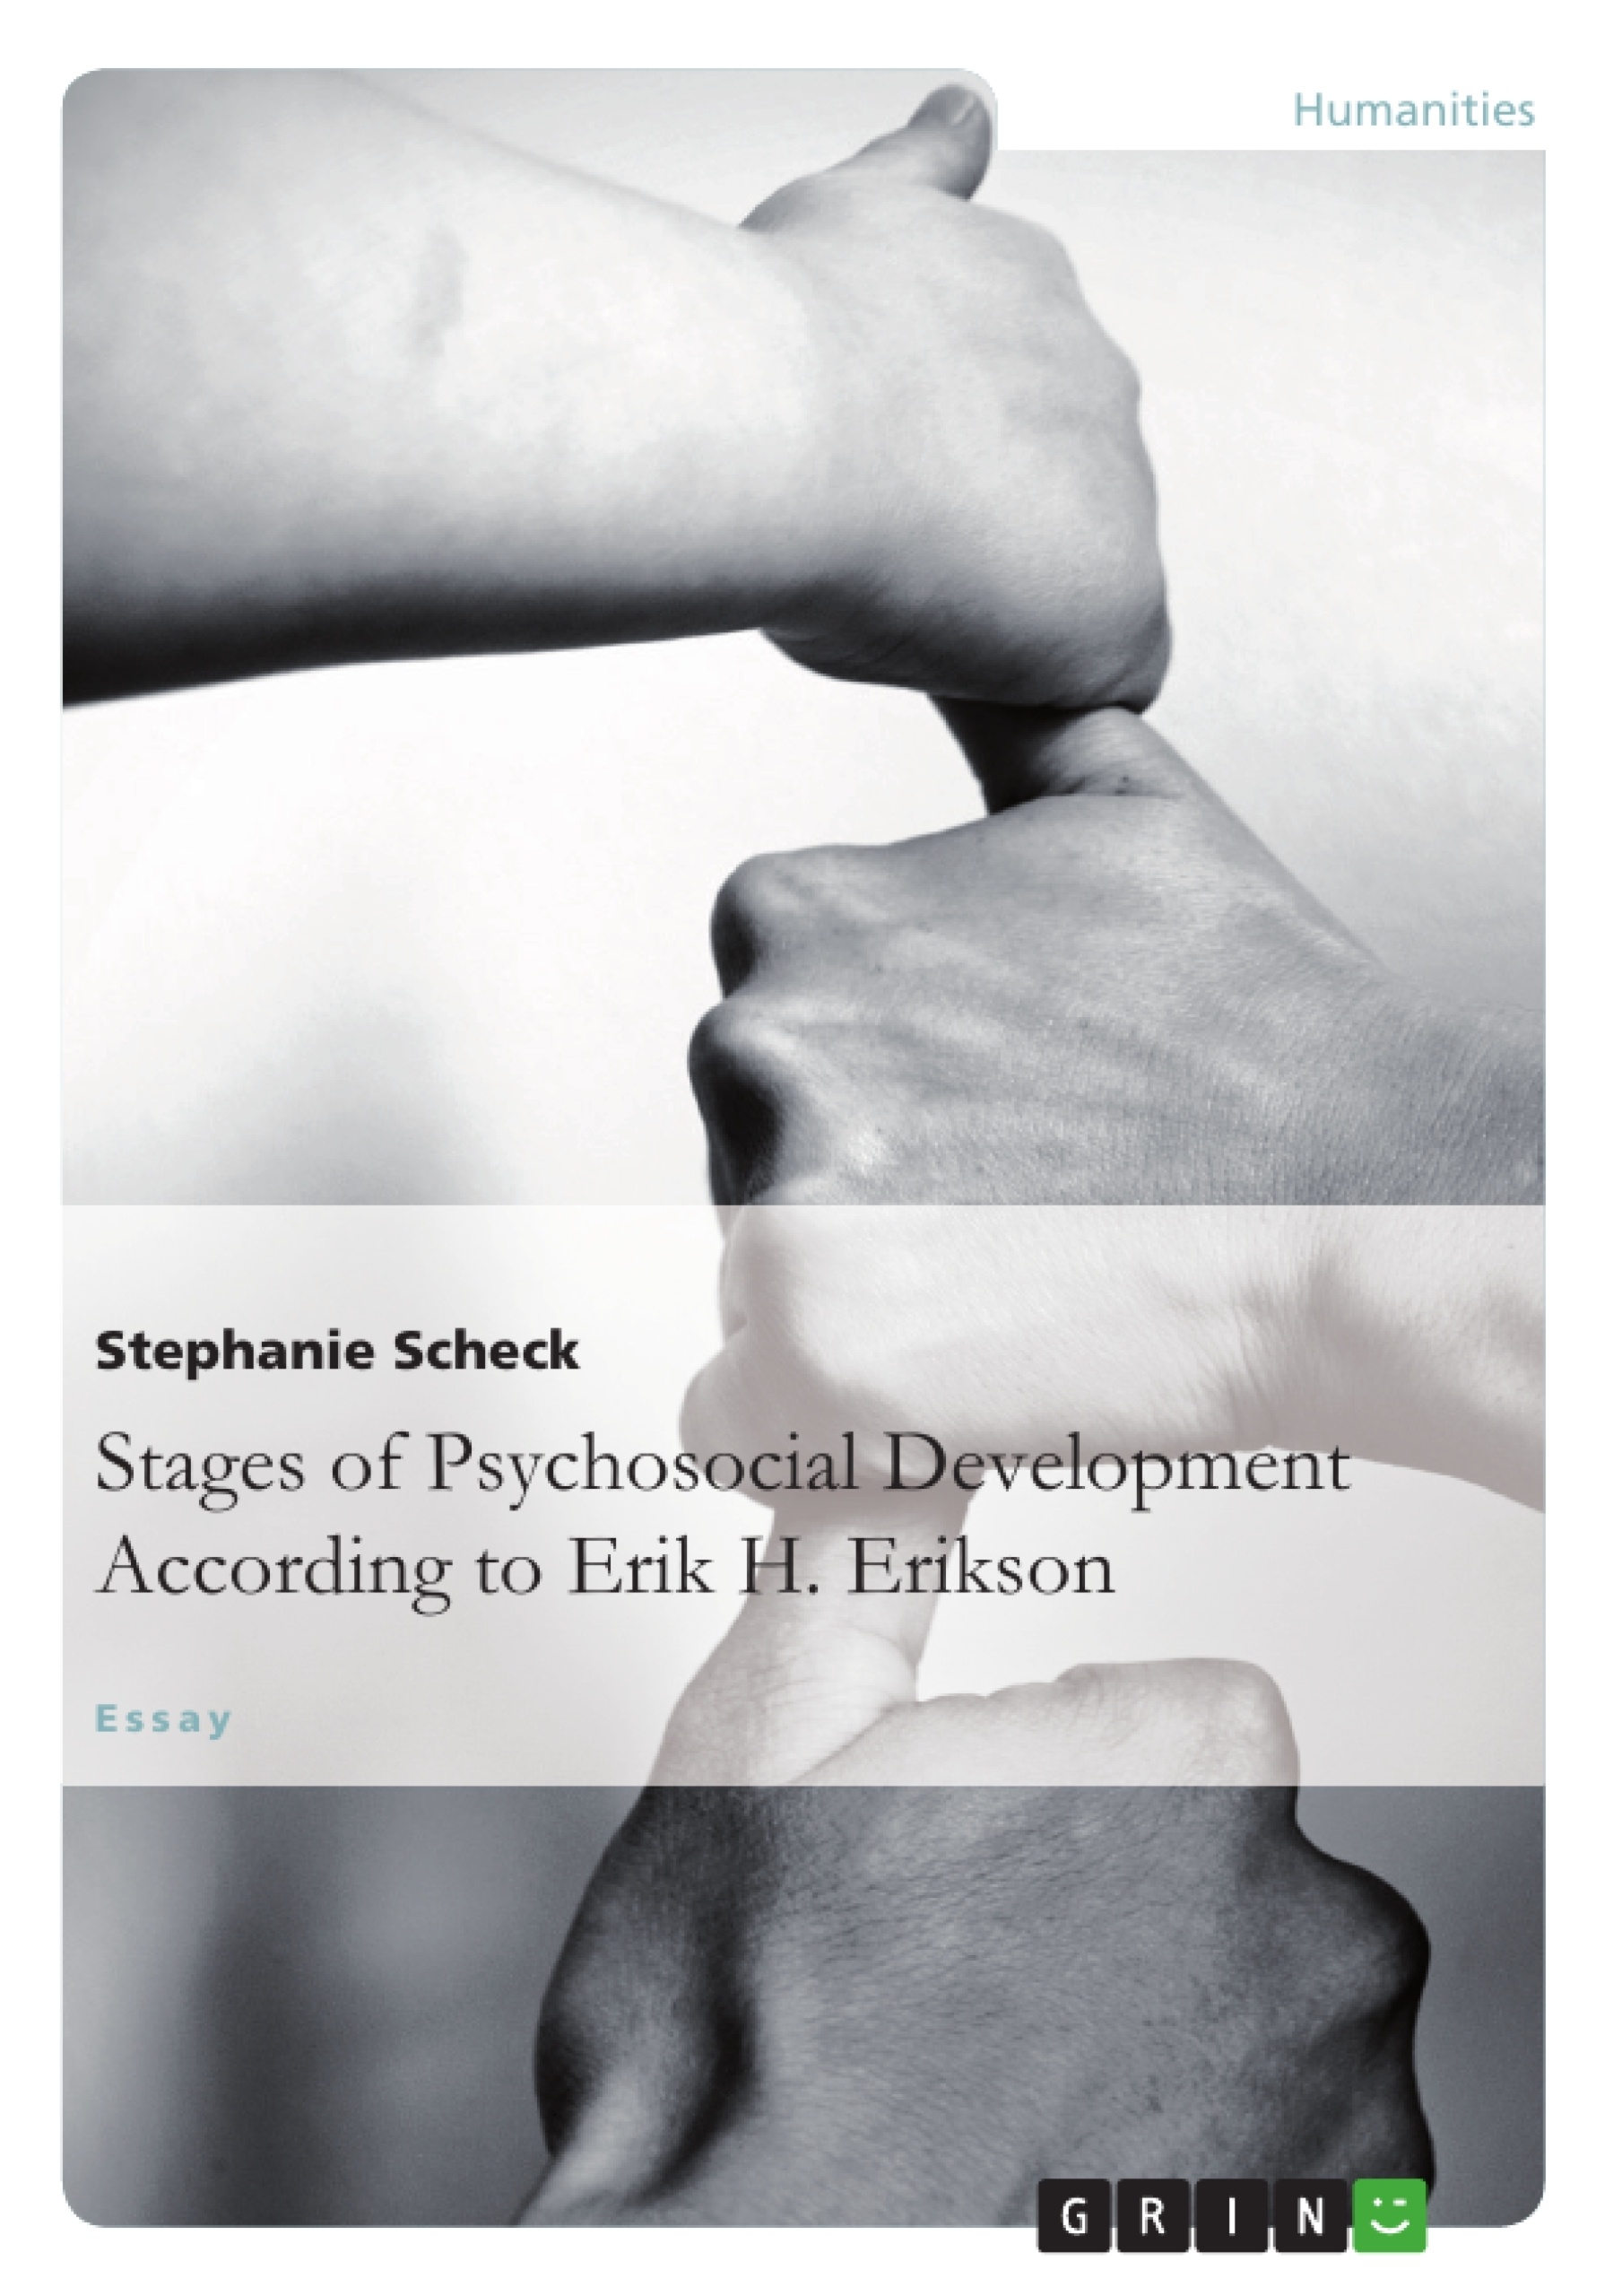 Título: The Stages of Psychosocial Development
According to Erik H. Erikson